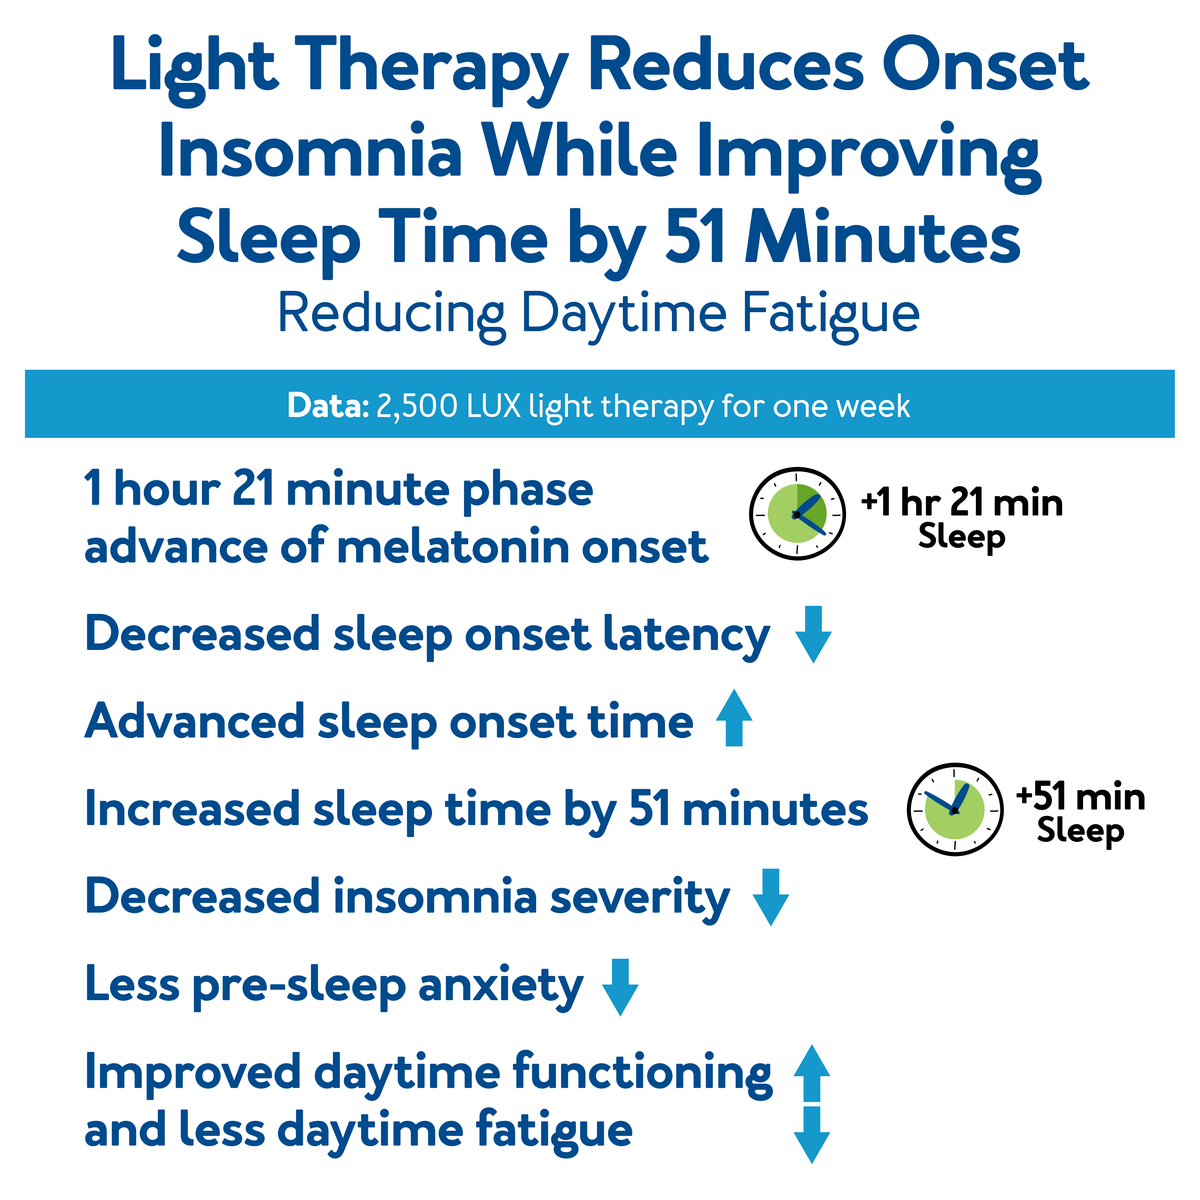 Light Therapy Reduces Onset Insomnia While Improving, further details are provided below.